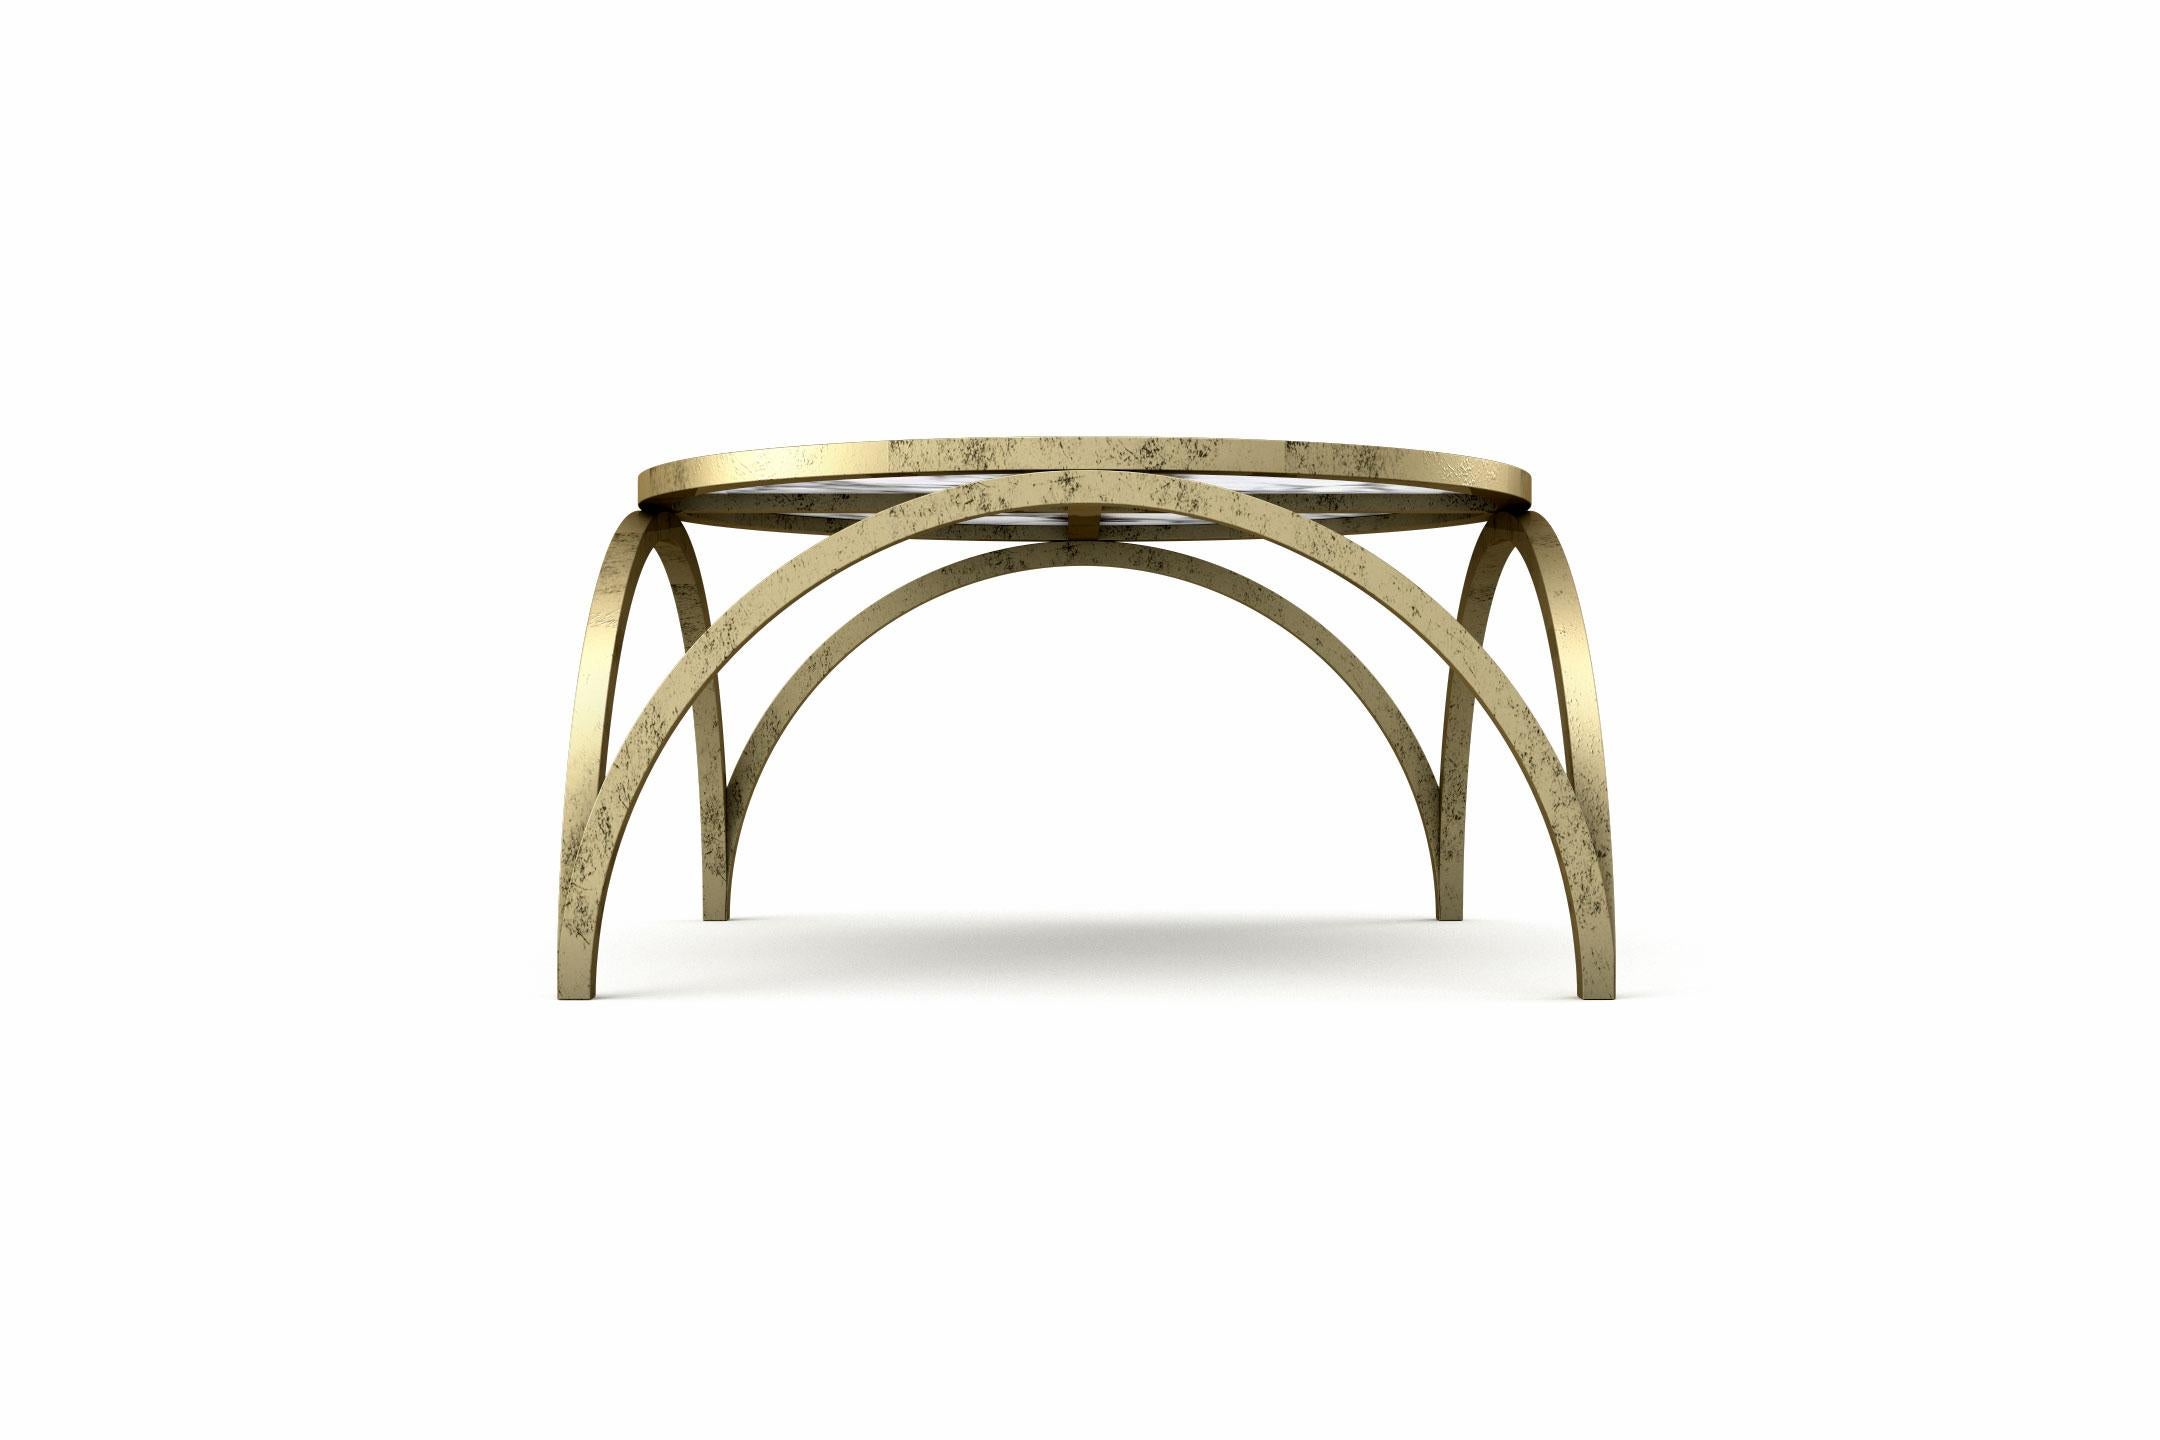 European Crescent Large Coffee Table - Modern Brass Coffee Table For Sale